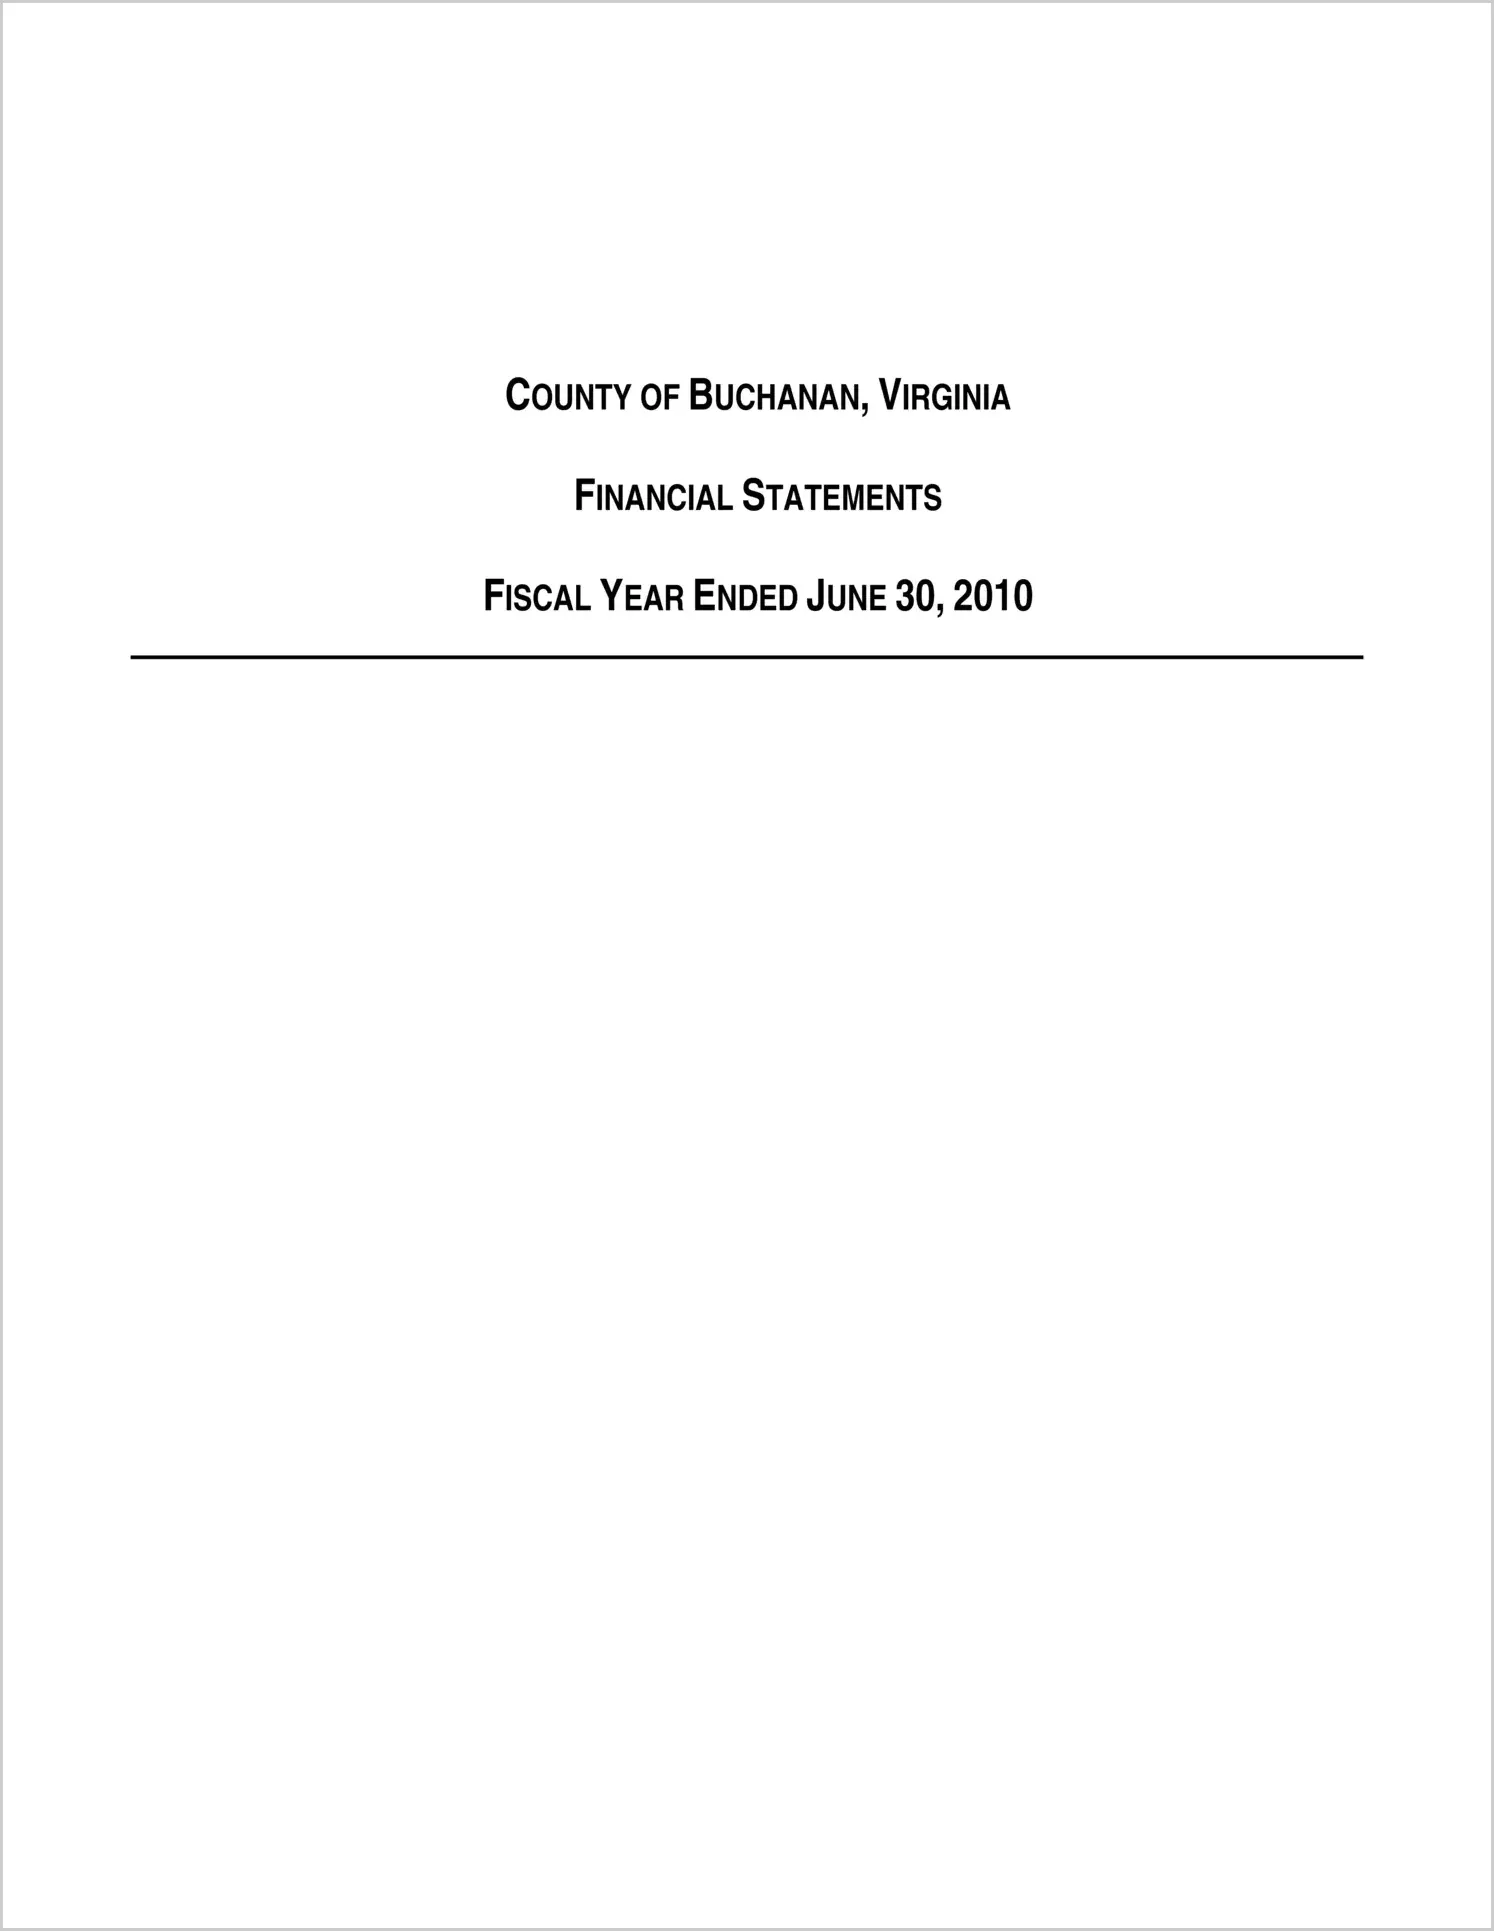 2010 Annual Financial Report for County of Buchanan